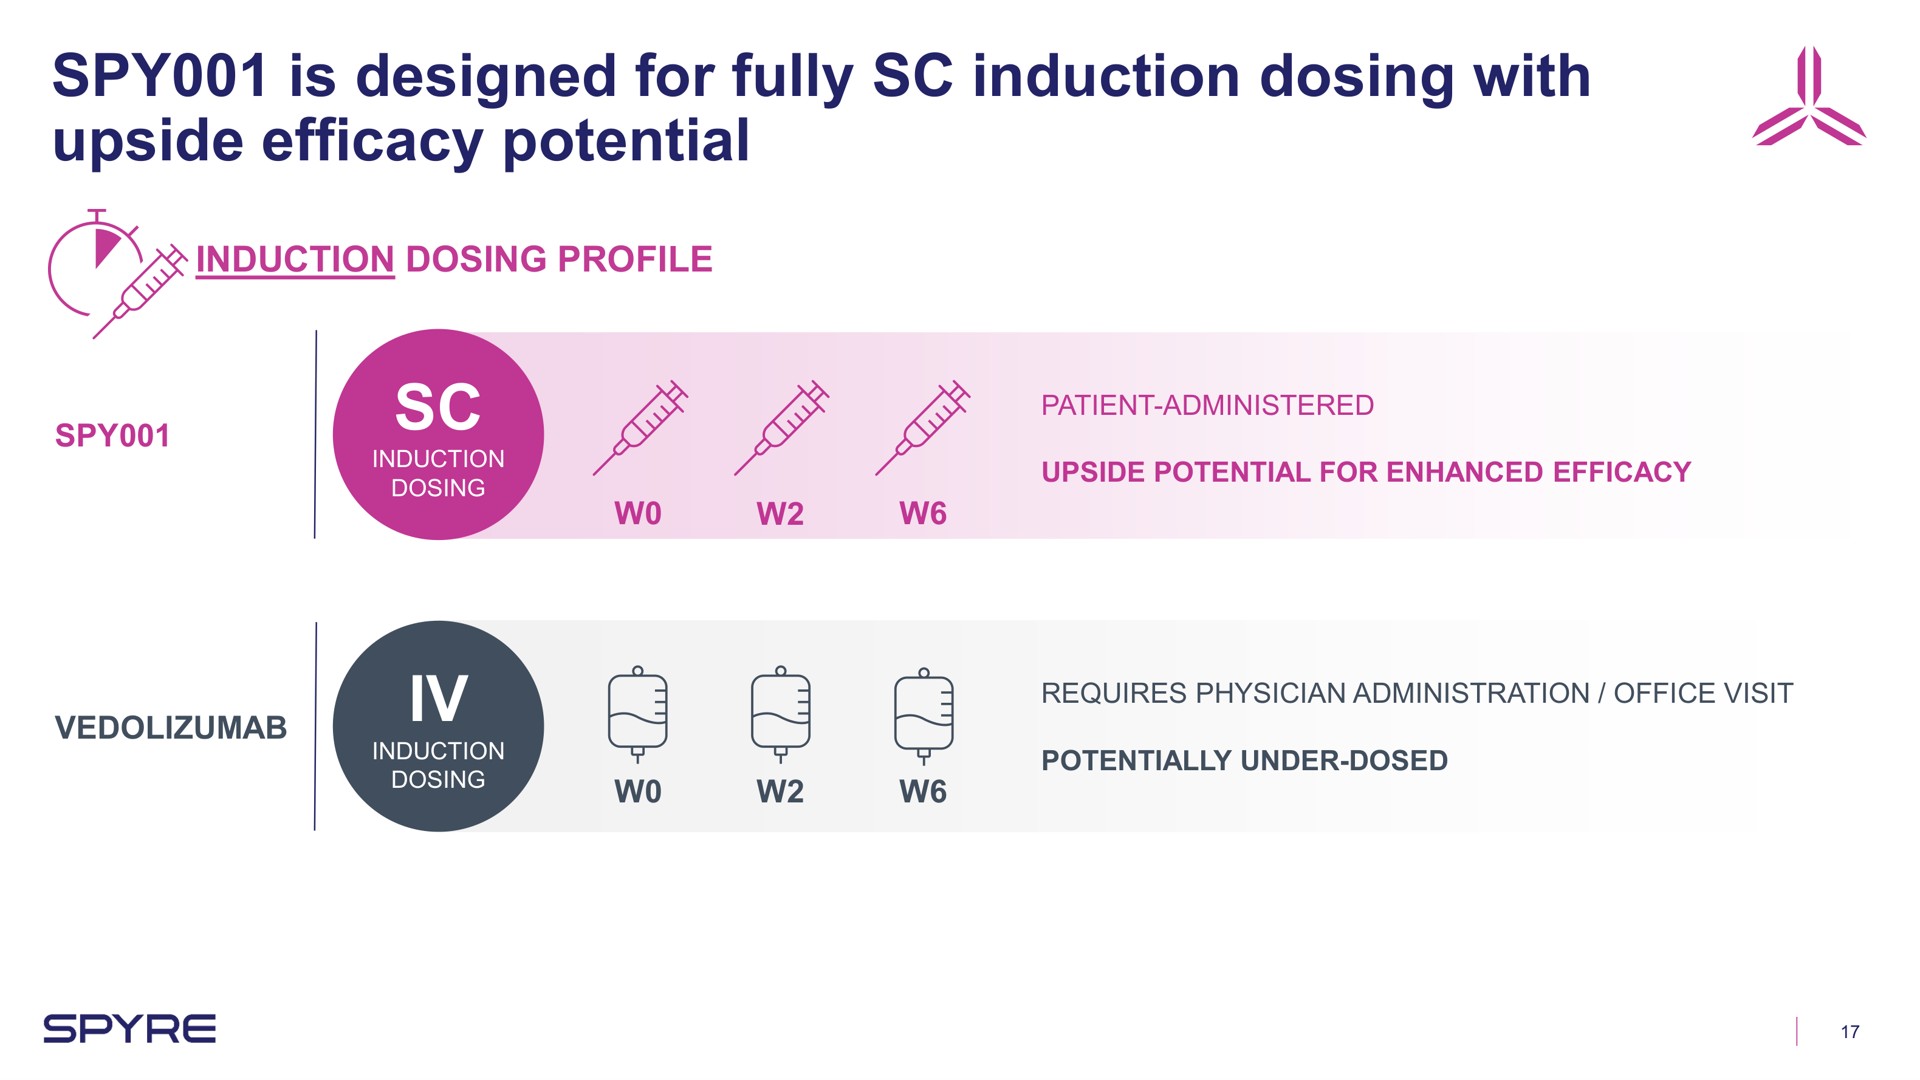 spy is designed for fully induction dosing with upside efficacy potential a | Aeglea BioTherapeutics